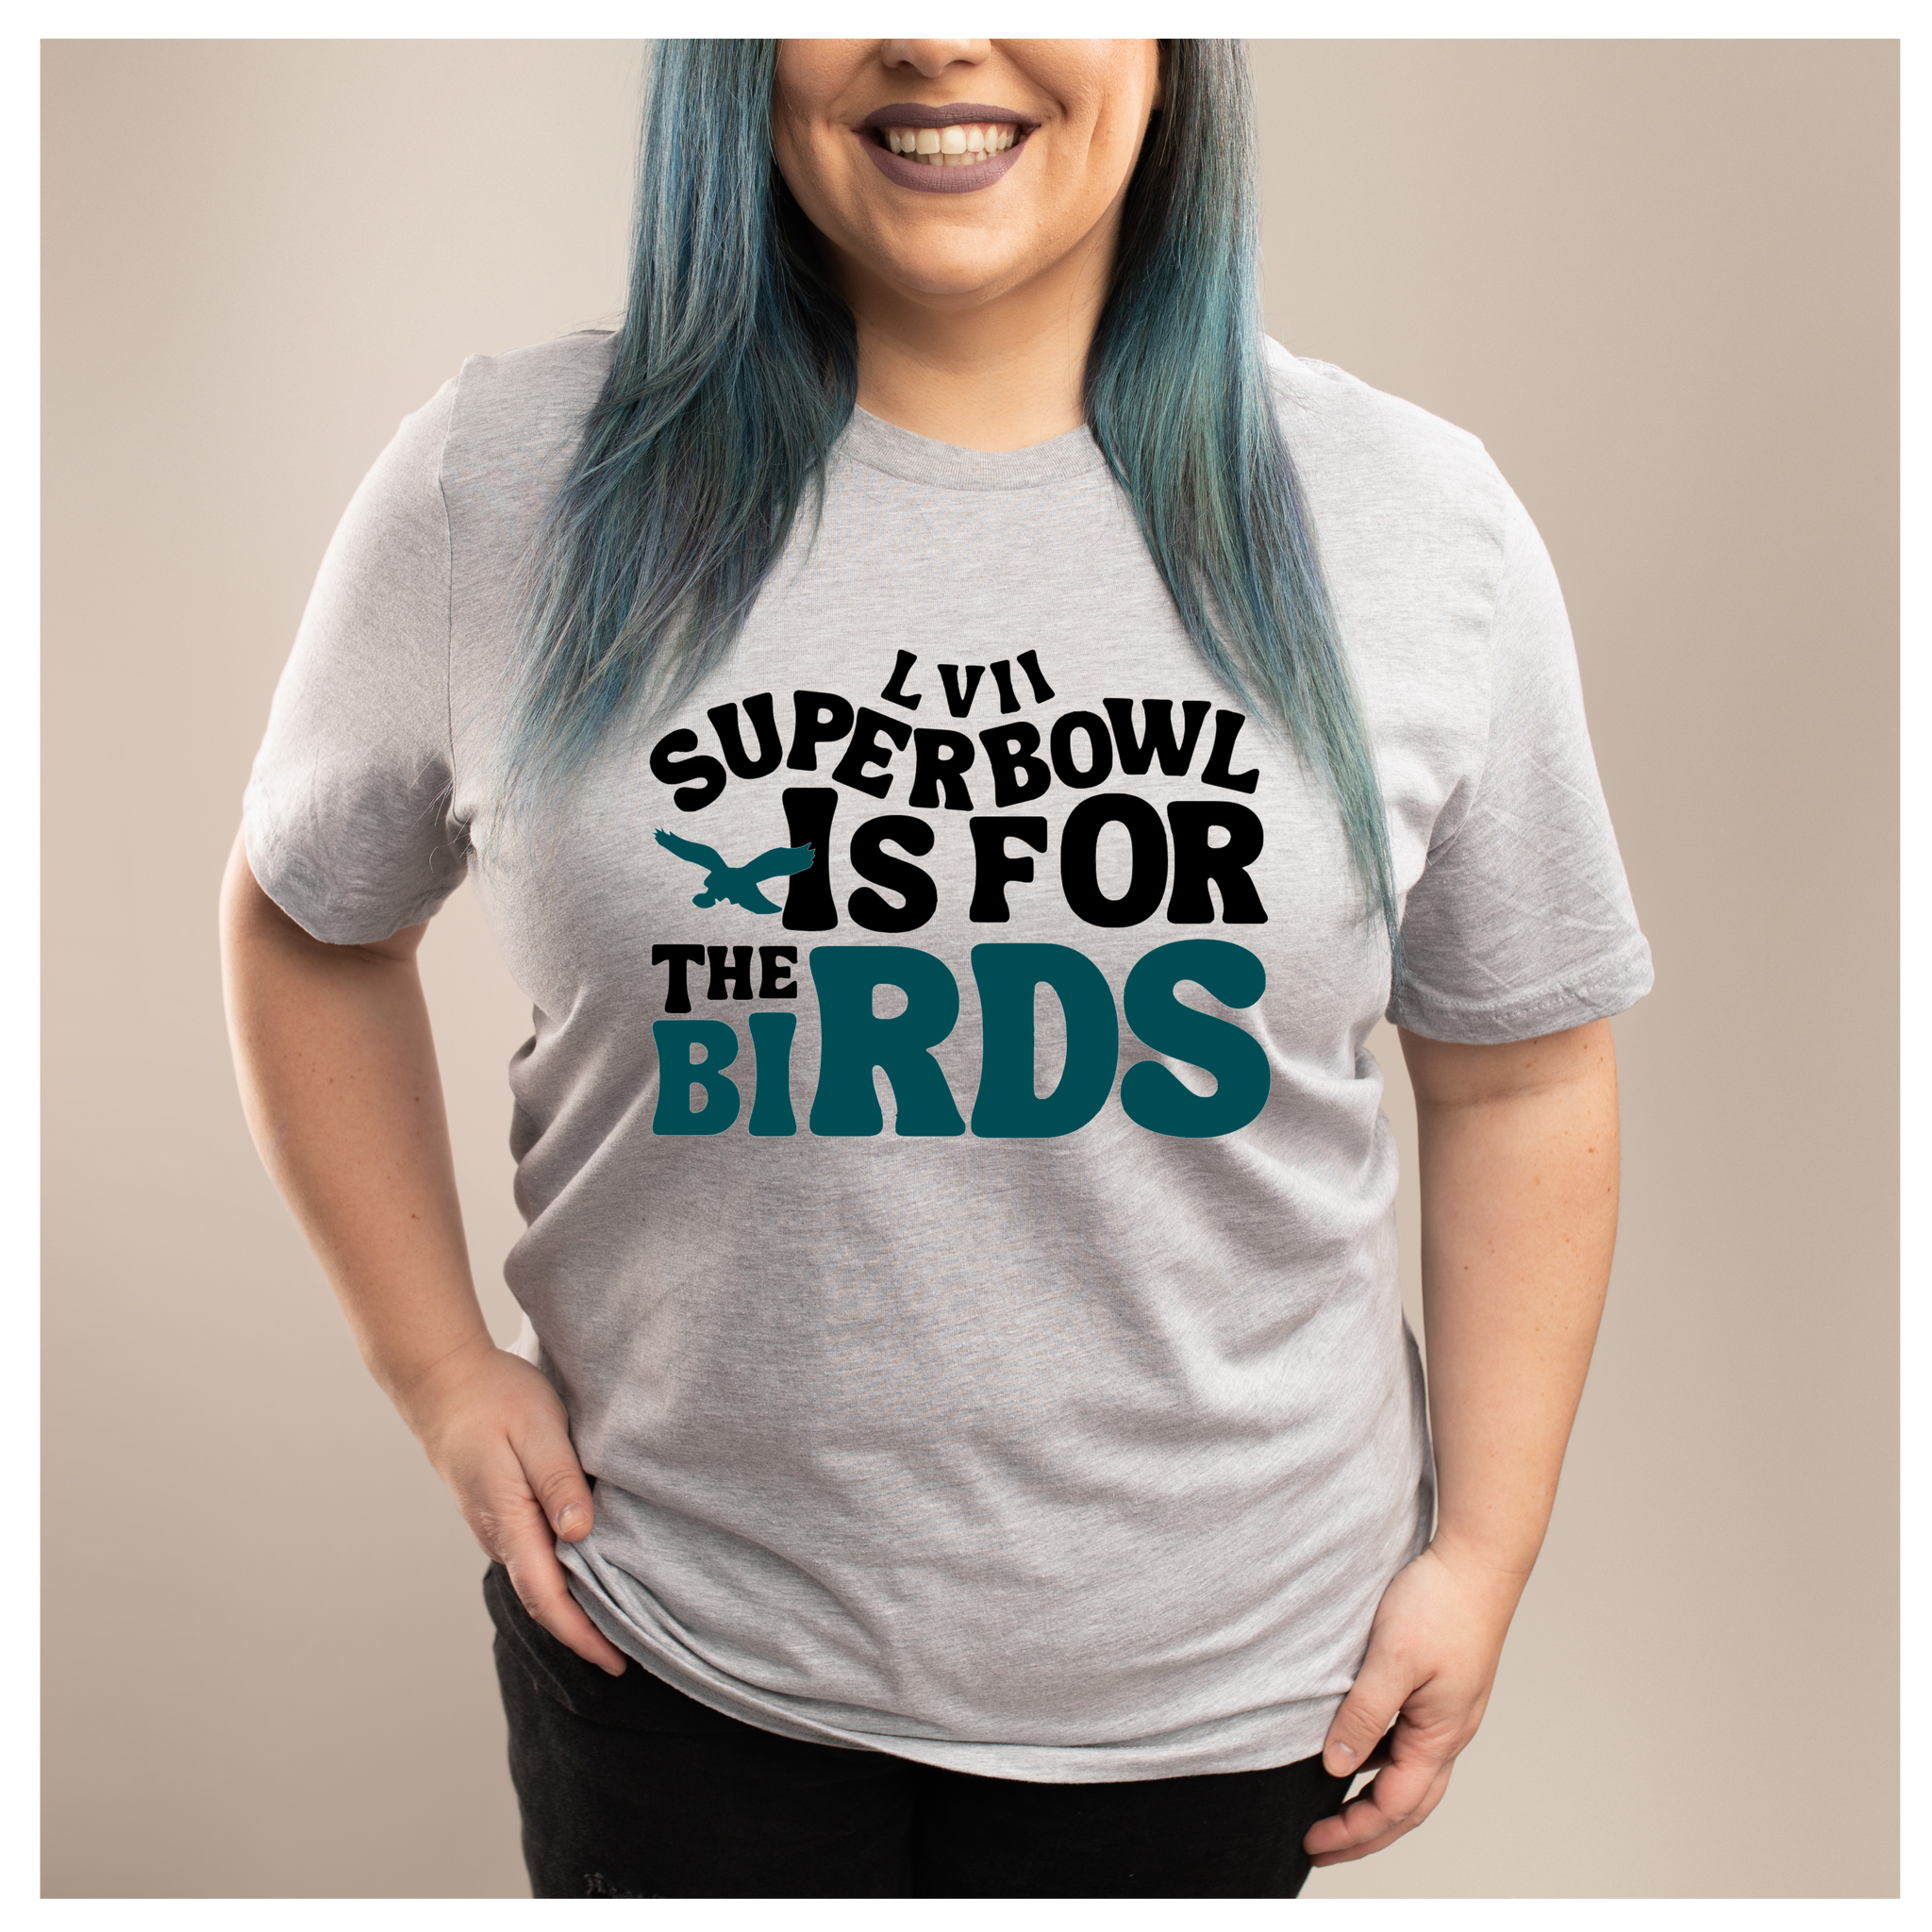 SB LVII is for the Birds Tee